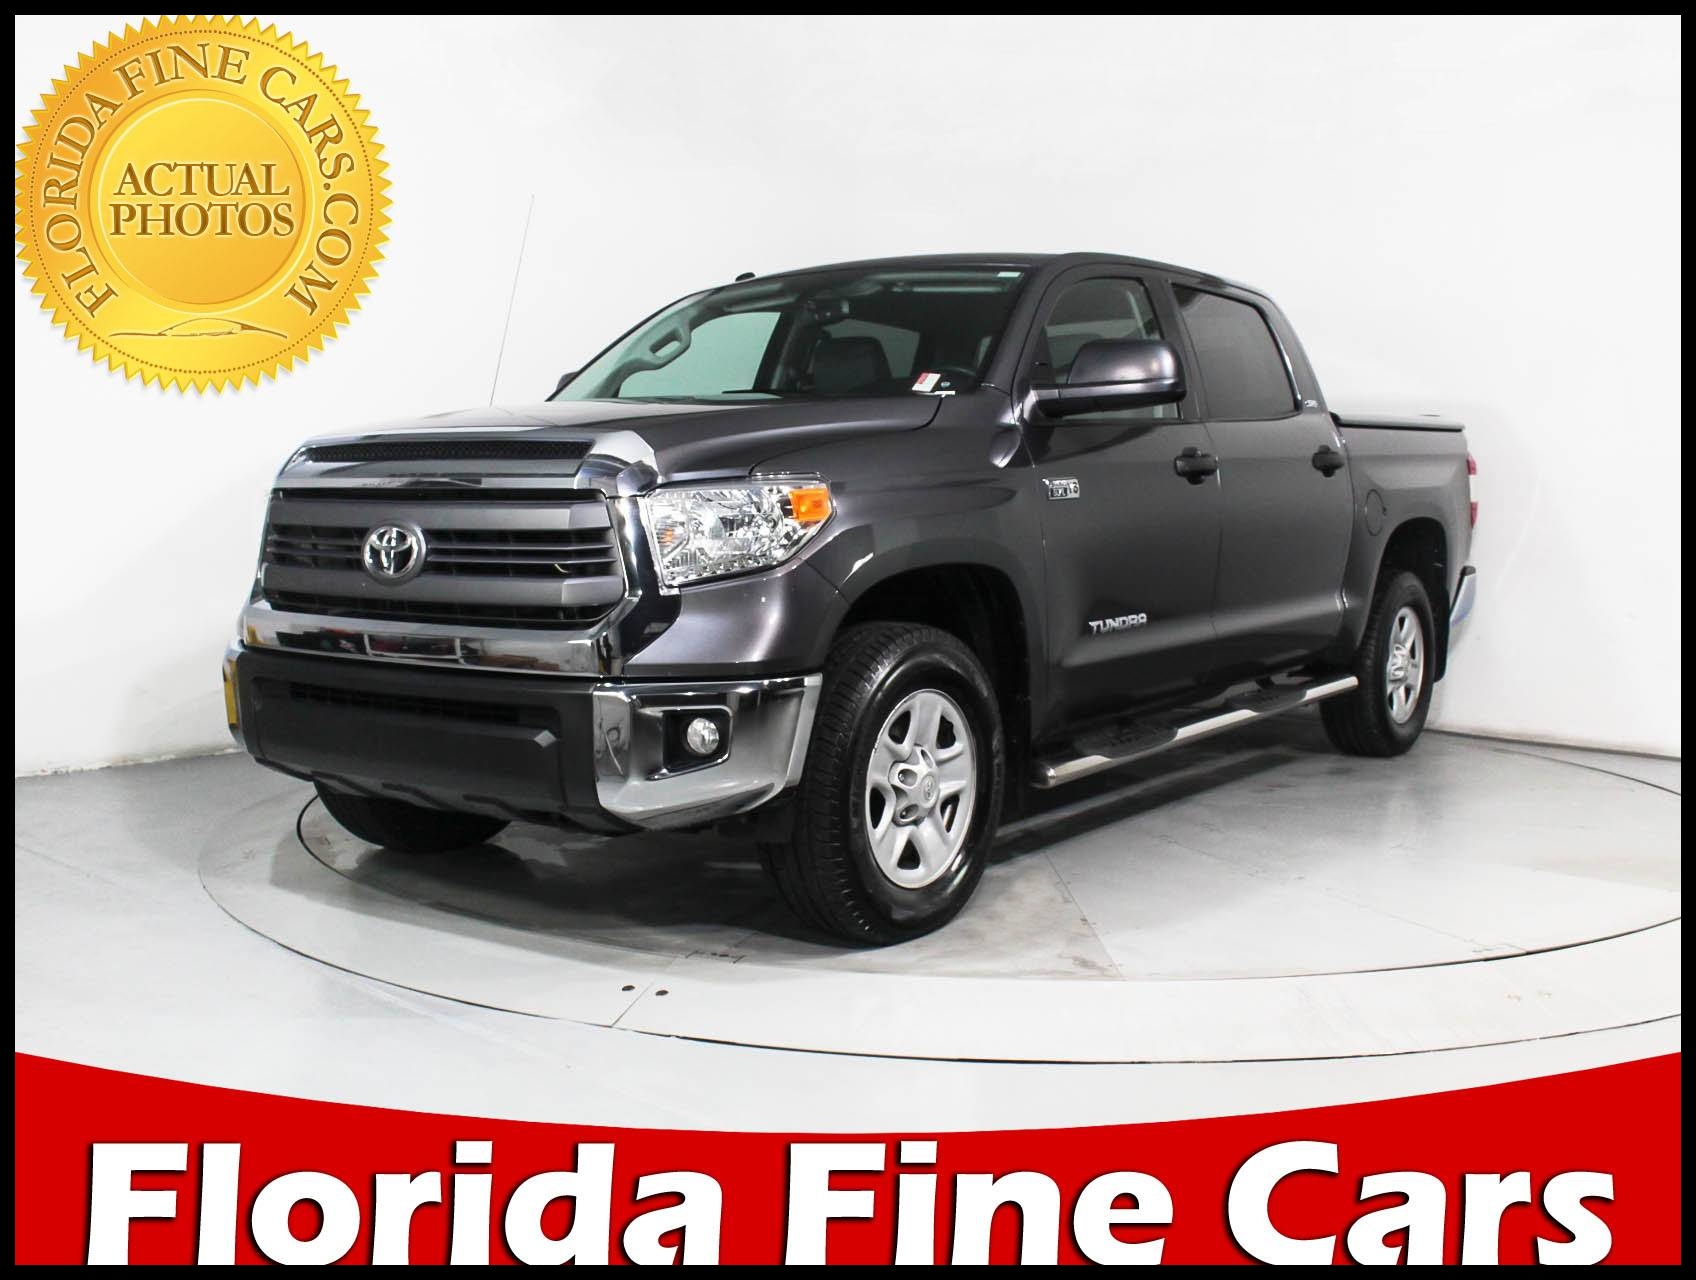 Used 2015 TOYOTA TUNDRA Sr5 4x4 Truck for sale in WEST PALM FL